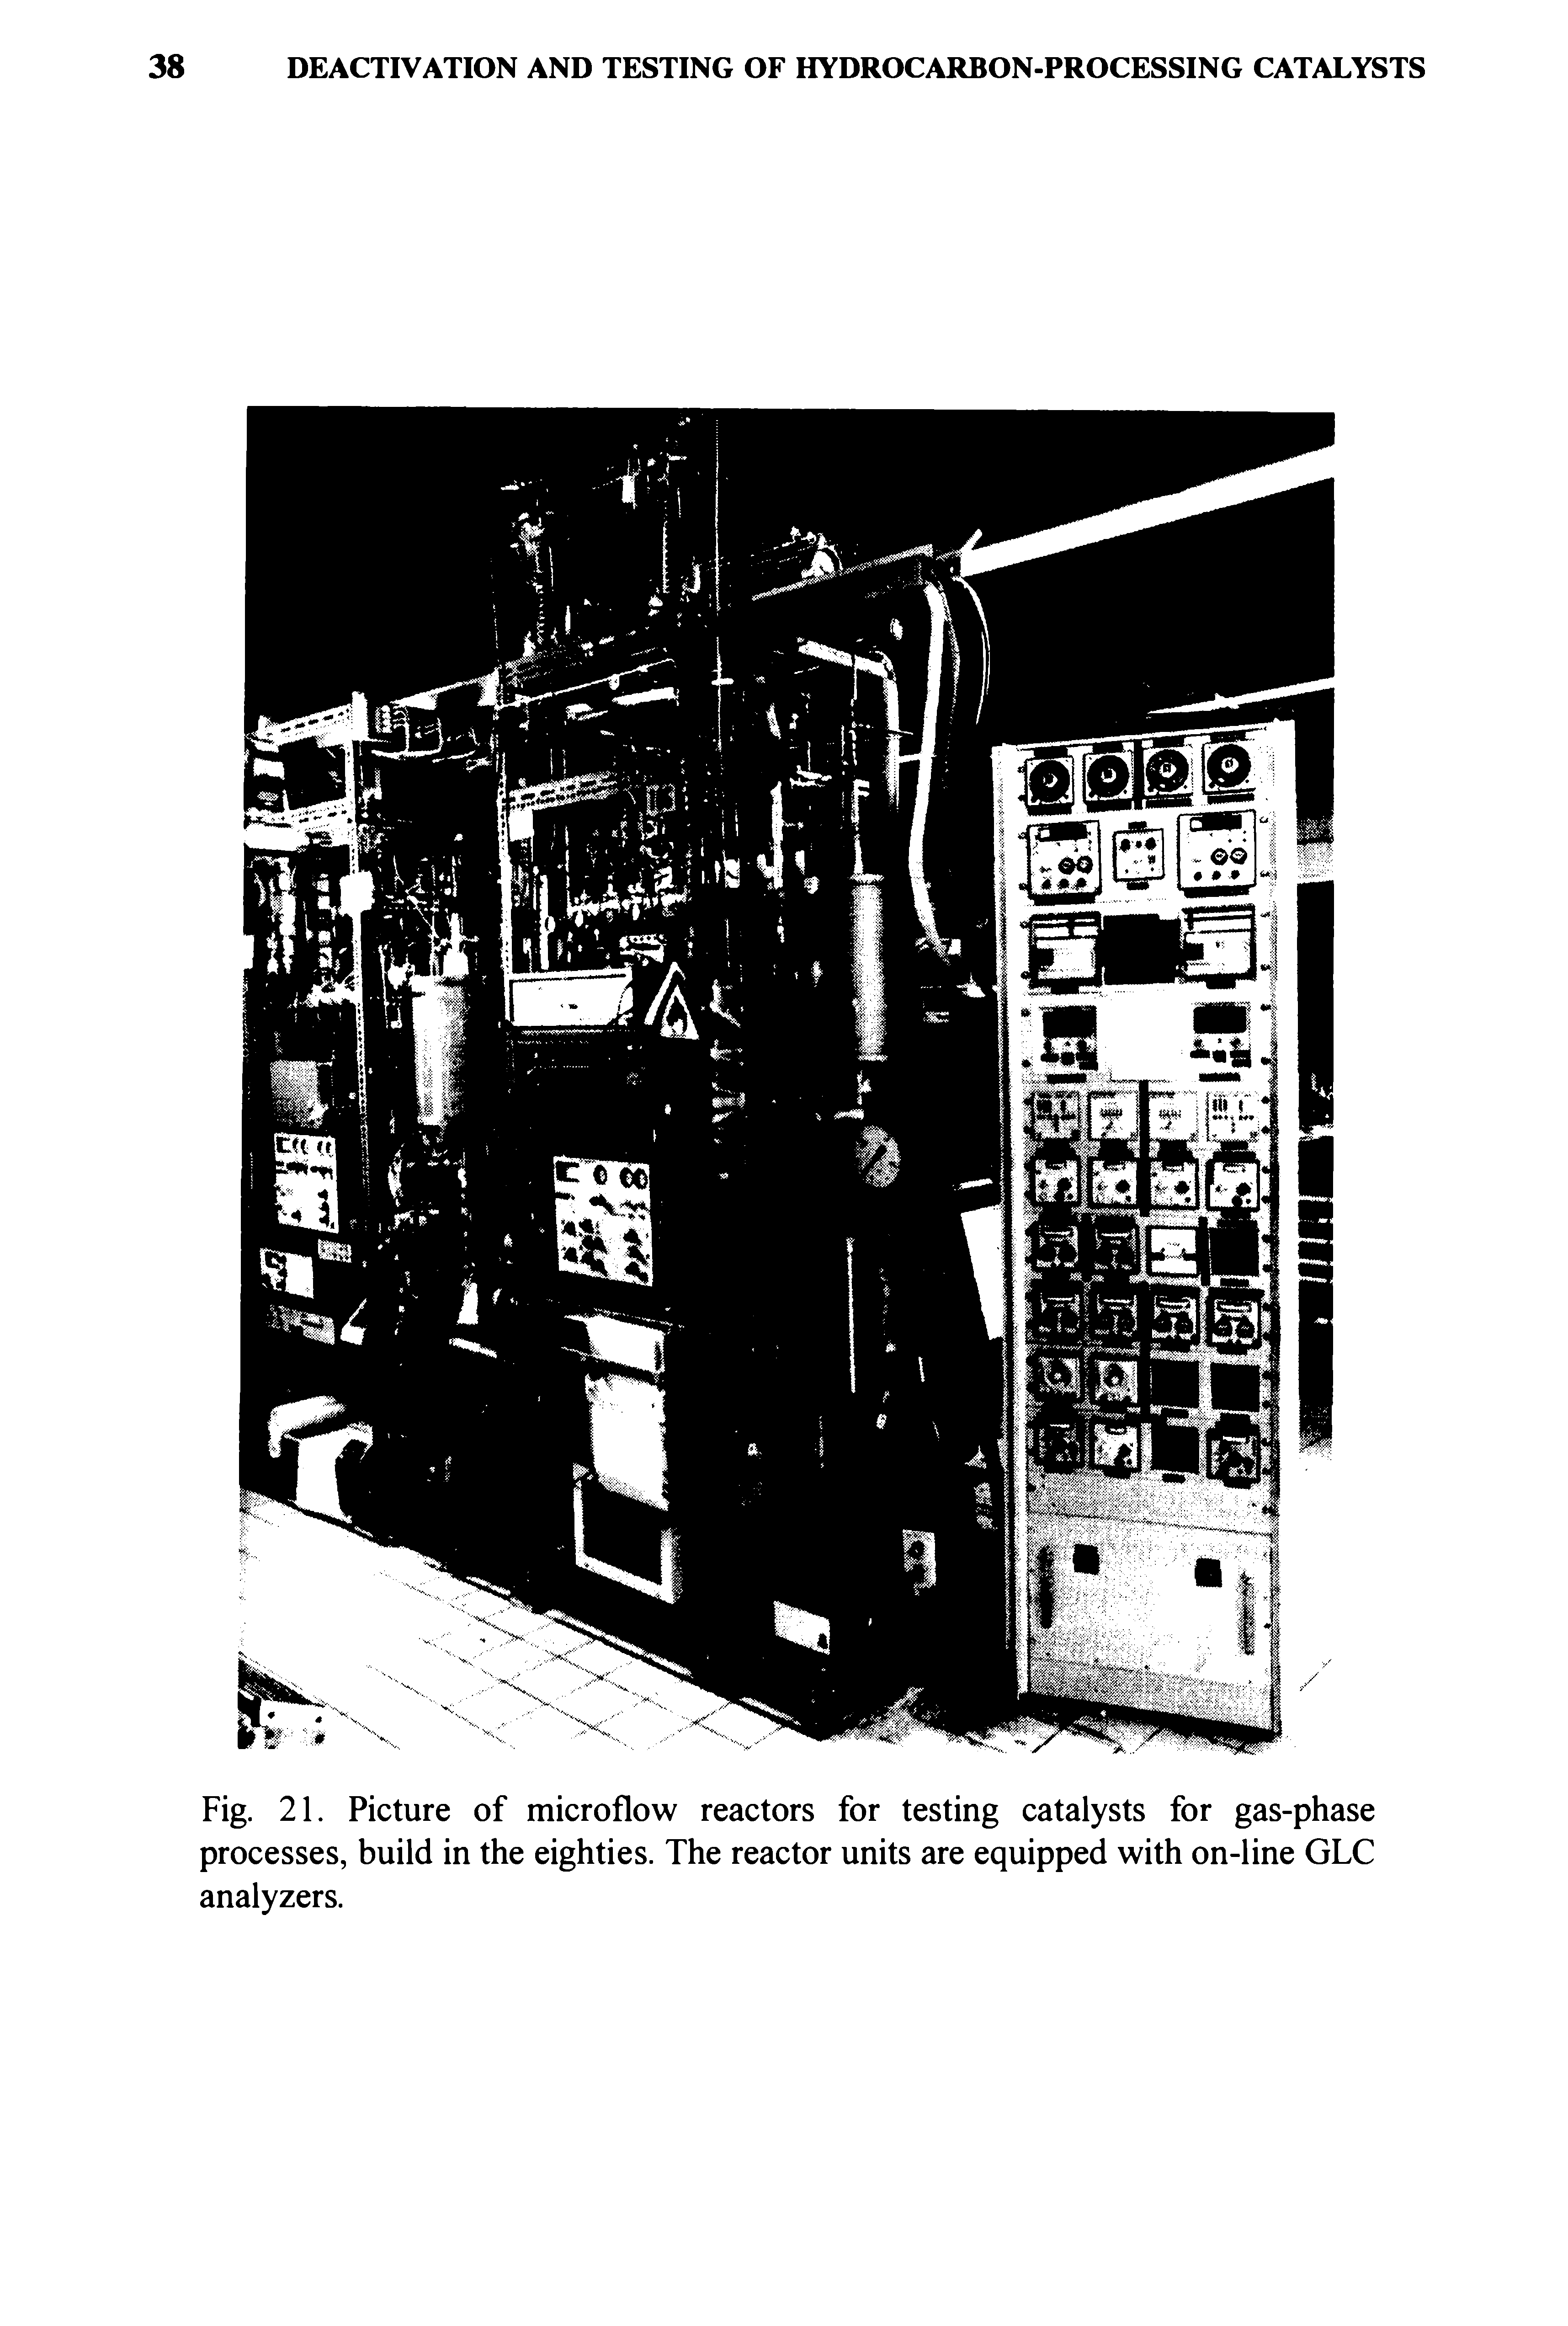 Fig. 21. Picture of microflow reactors for testing catalysts for gas-phase processes, build in the eighties. The reactor units are equipped with on-line GLC analyzers.